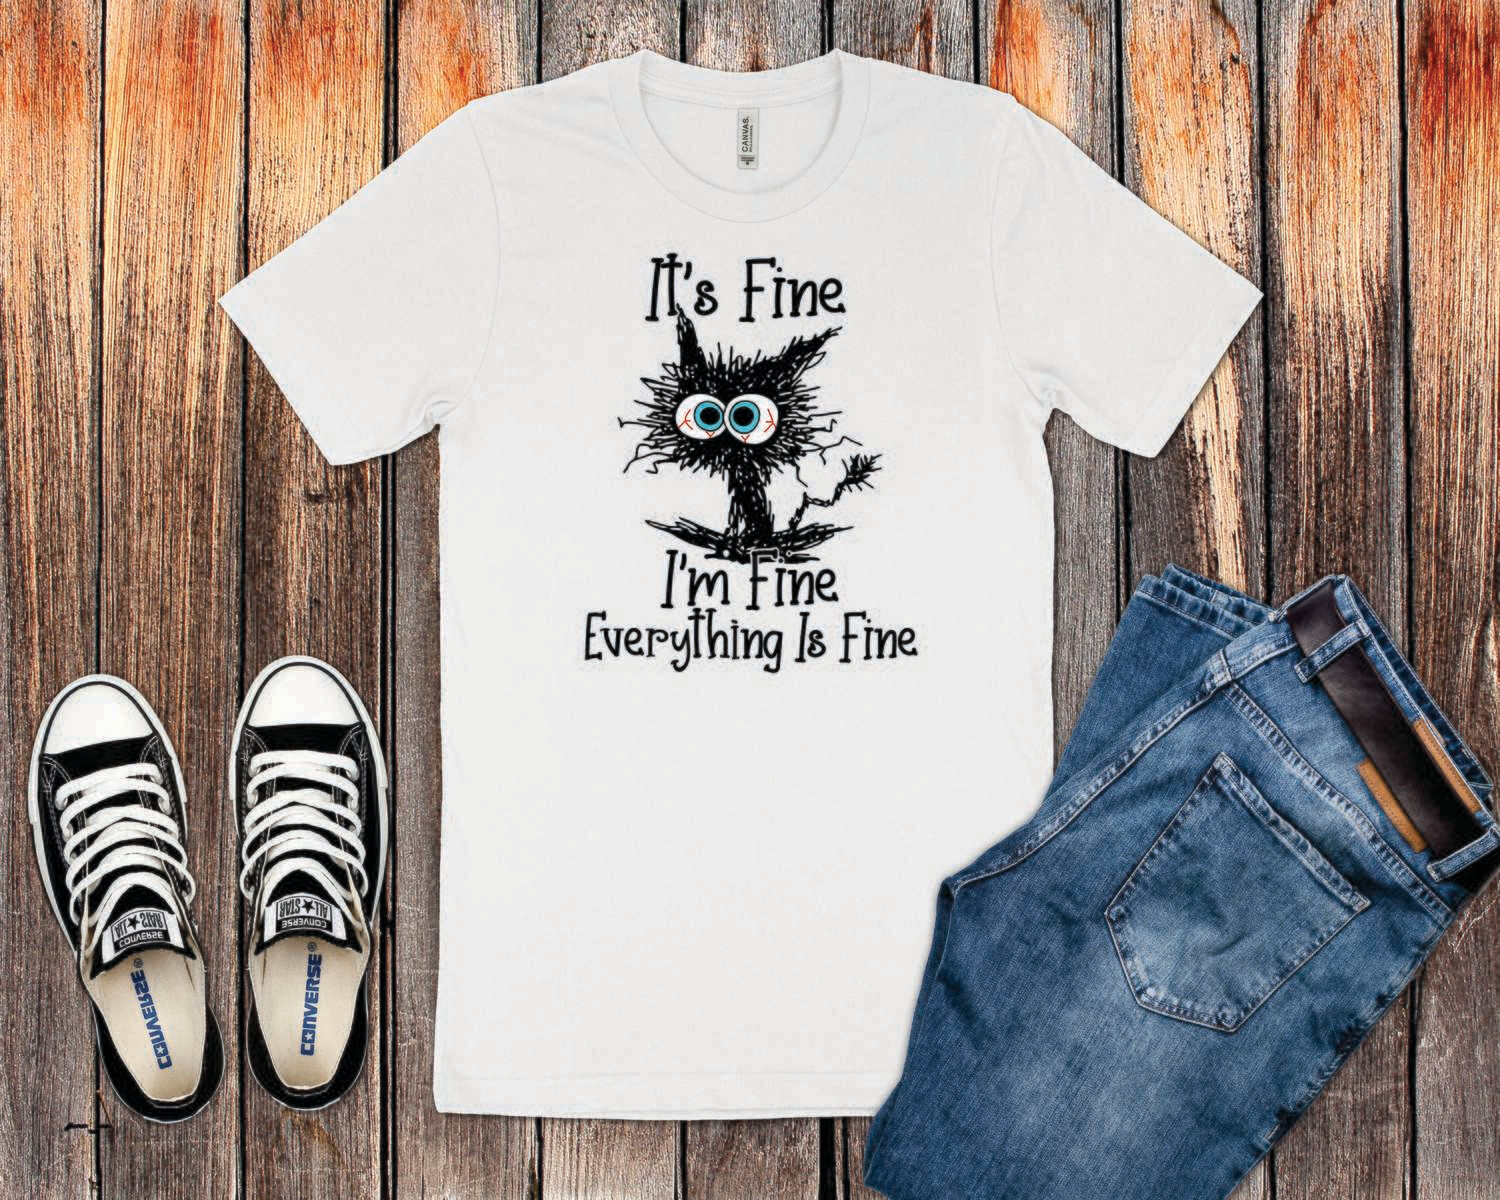 It's Fine. I'm Fine. Everything is Fine. T-Shirt